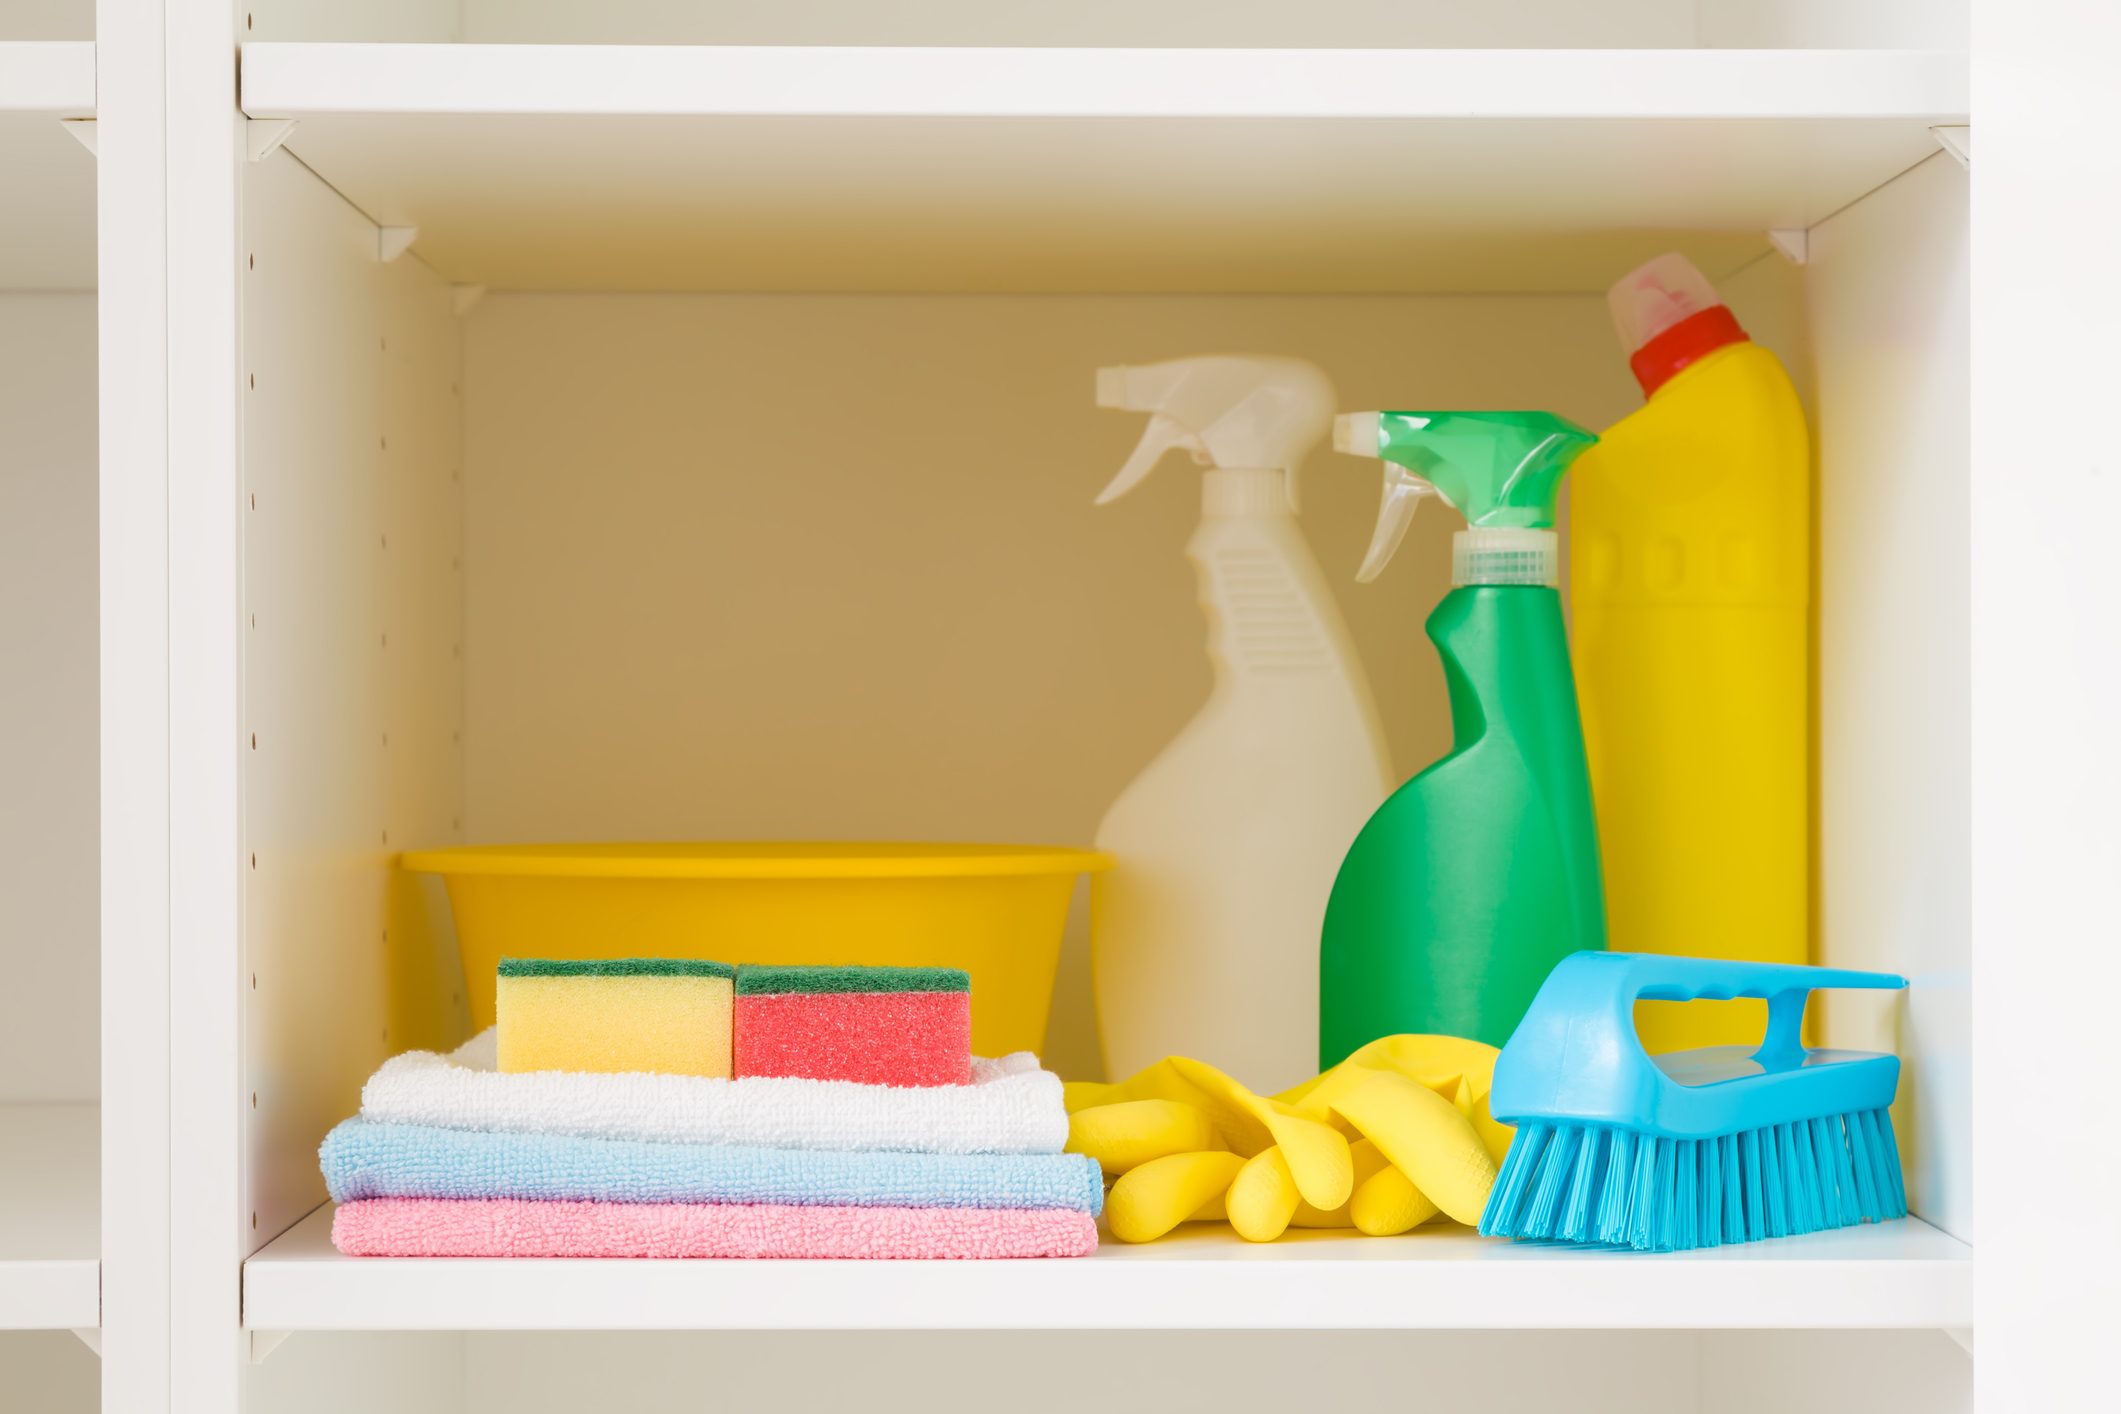 Cleaning Supply Organization and Storage Ideas for 5 Areas In Your Home   Bathroom cleaning supplies, Cleaning supplies organization, Cleaning  supplies